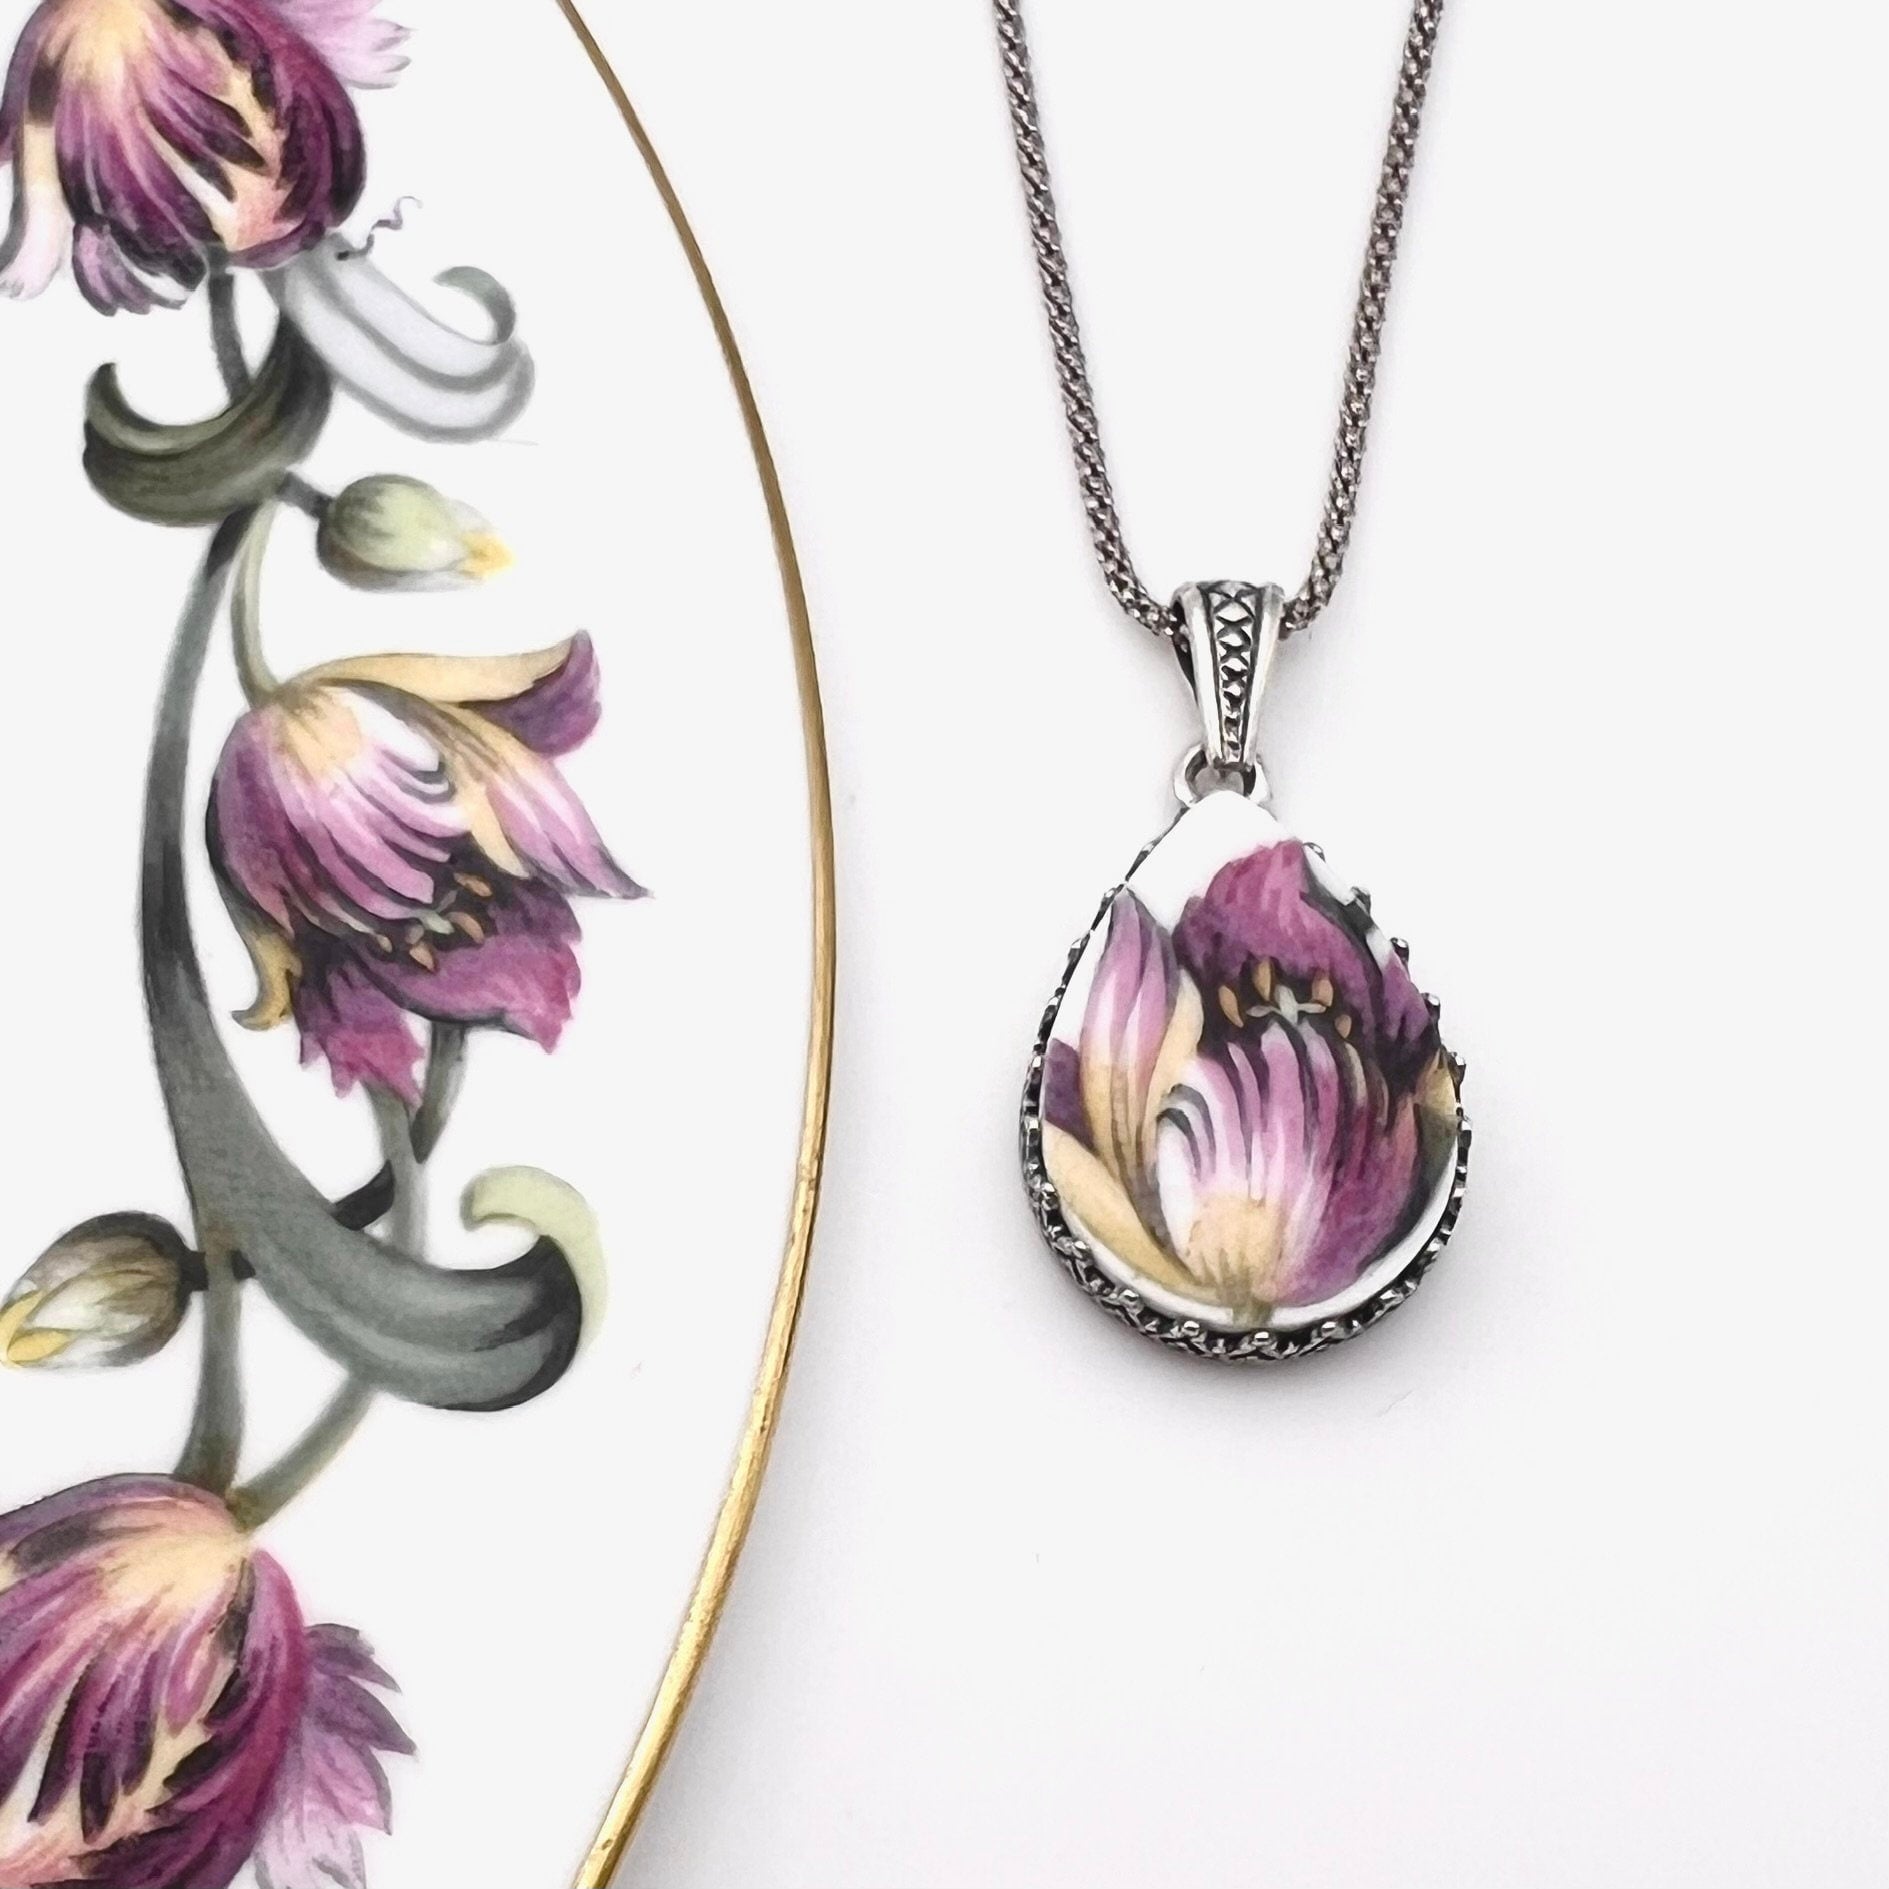 Tulip Necklace, Broken China Jewelry, Sterling Silver, Unique 20th Anniversary Gift for Wife, Vintage China Jewelry, Purple Flower Necklace